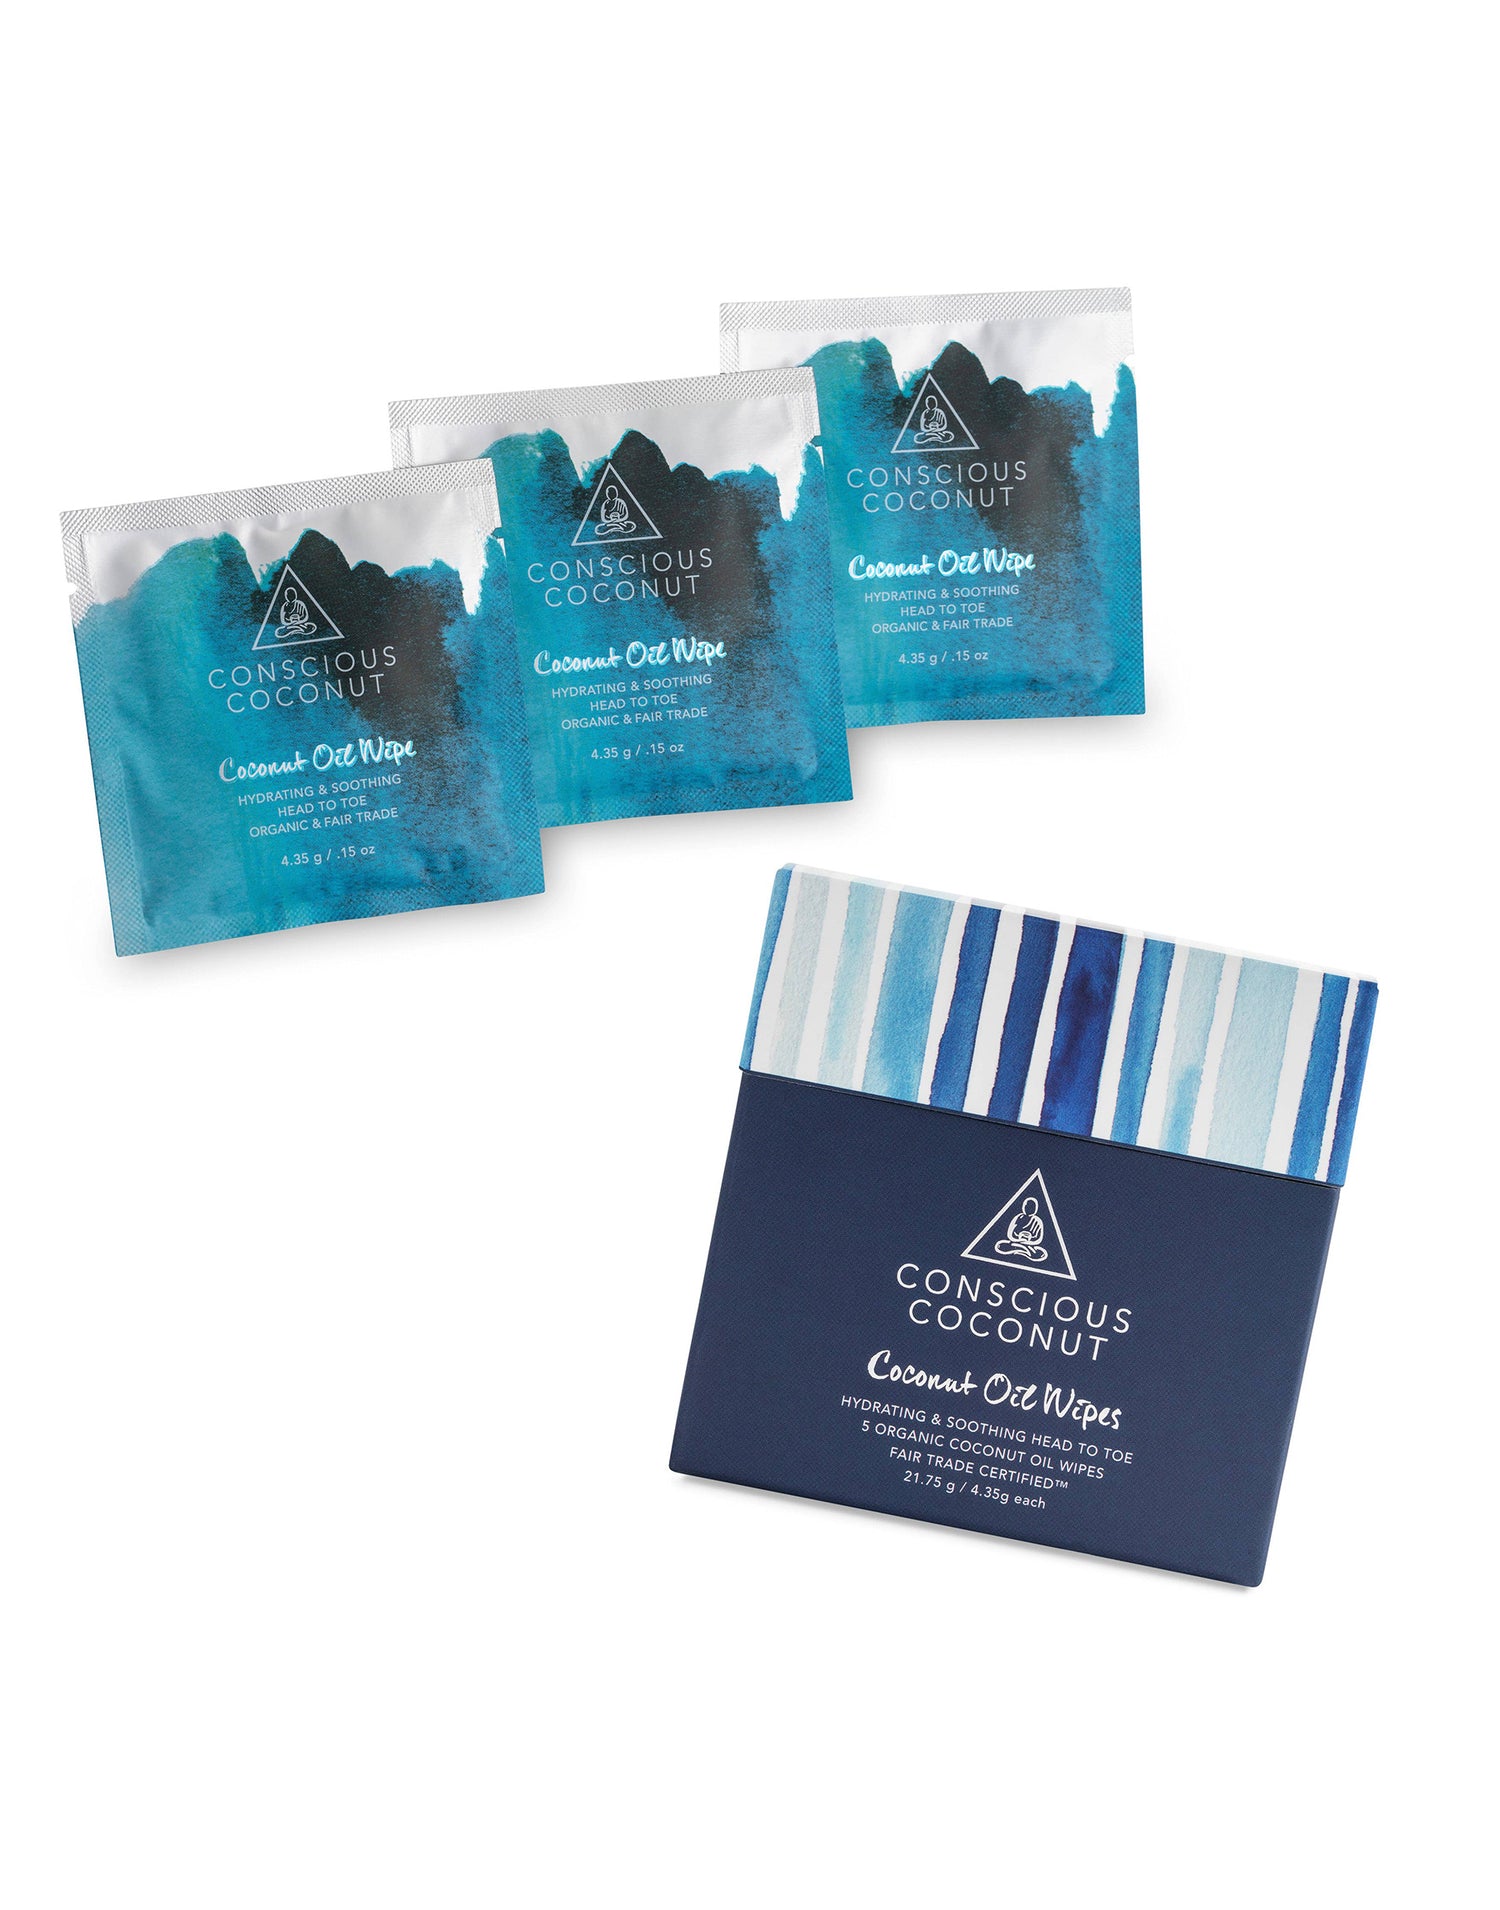 Soothing Coconut Oil Wipes (5 Travel Pack) by Conscious Coconut - Product View